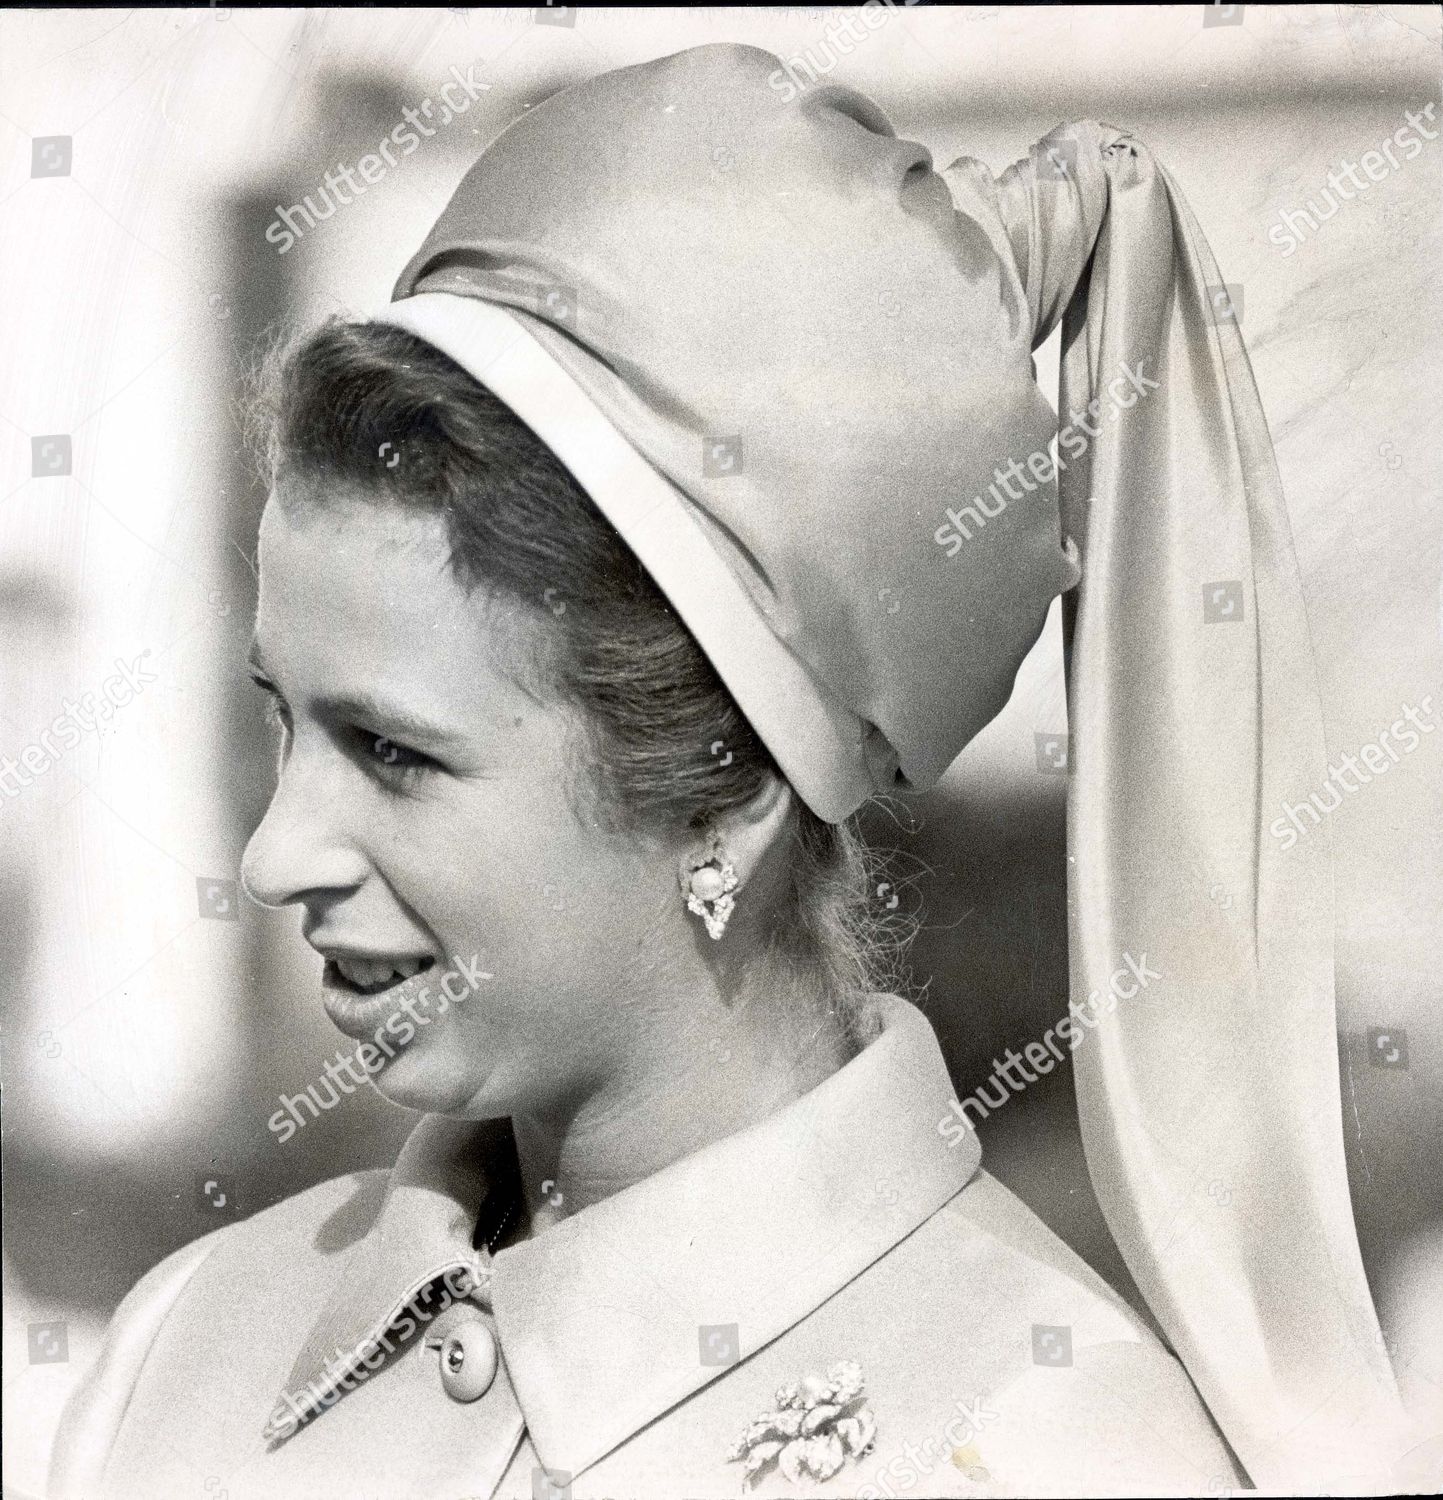 princess-anne-now-princess-royal-september-1970-princess-anne-at-heathrow-today-before-her-flight-to-bruggen-in-germany-princess-anne-was-wearing-yellow-satin-coat-and-matching-hat-with-two-long-tails-royalty-shutterstock-editorial-1100812a.jpg